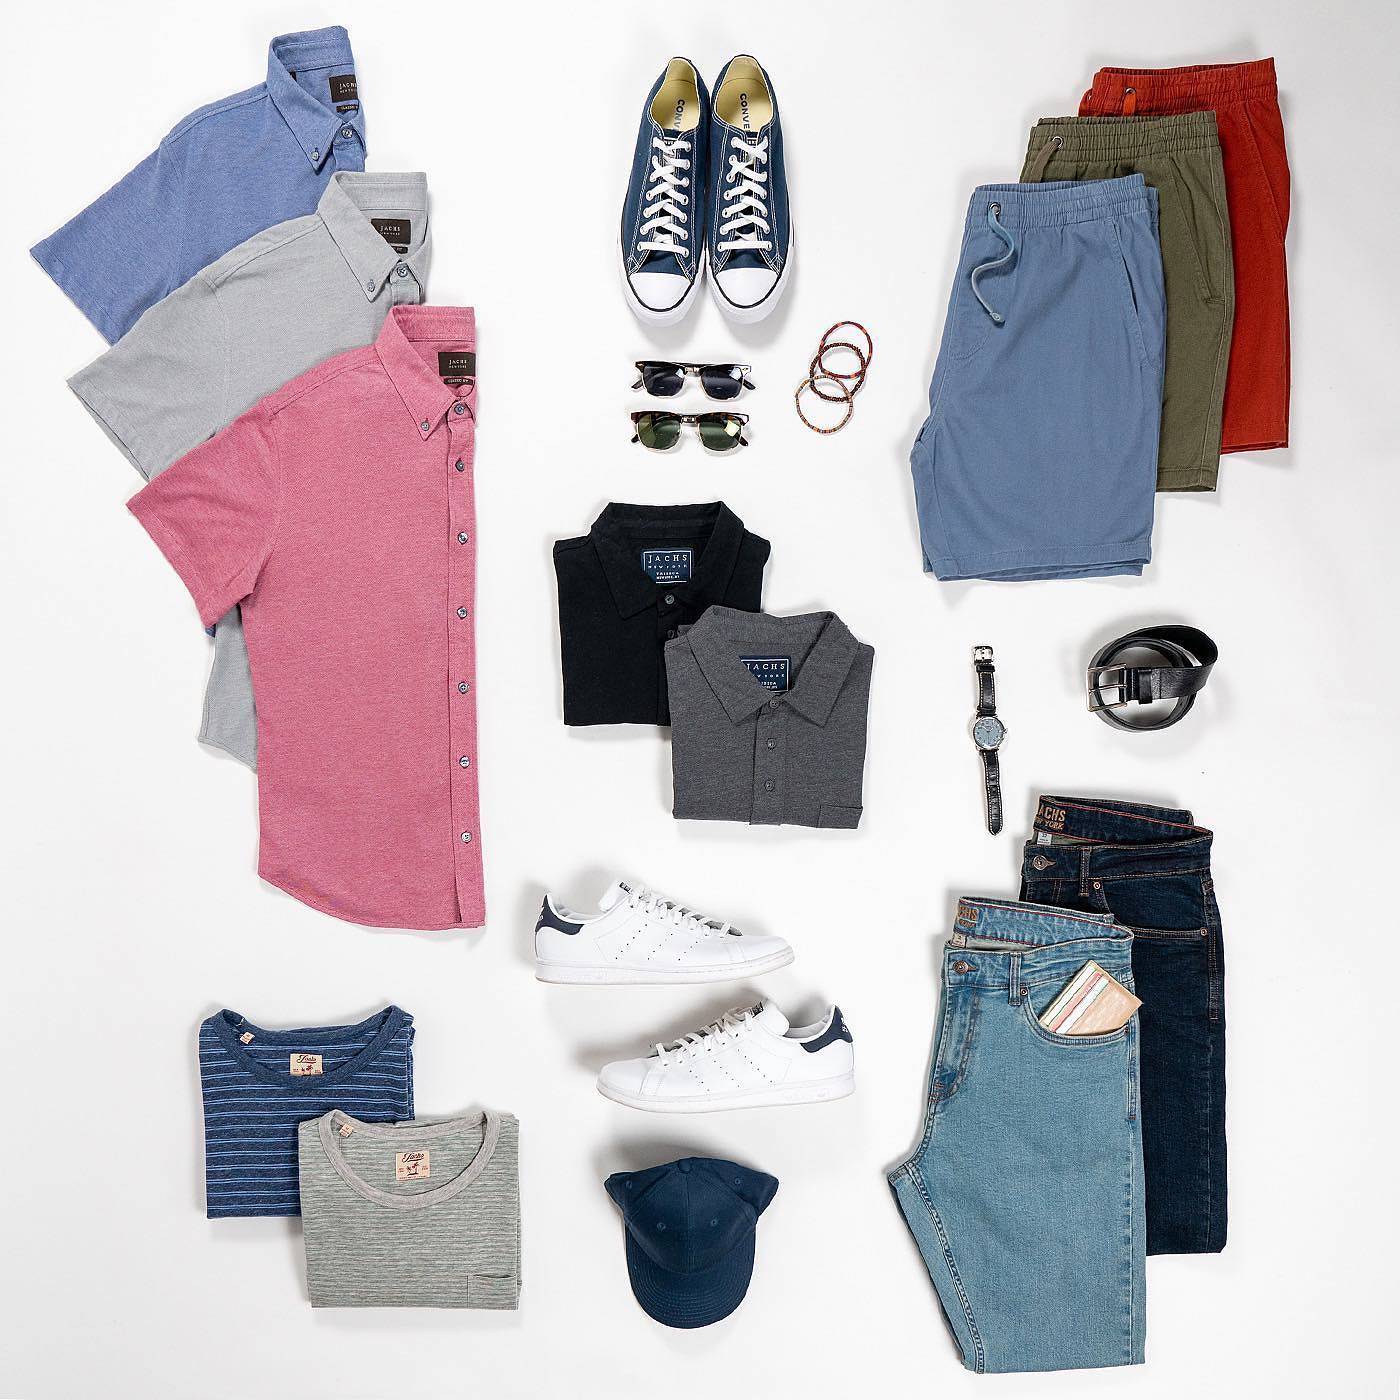 Shop male new spring arrivals